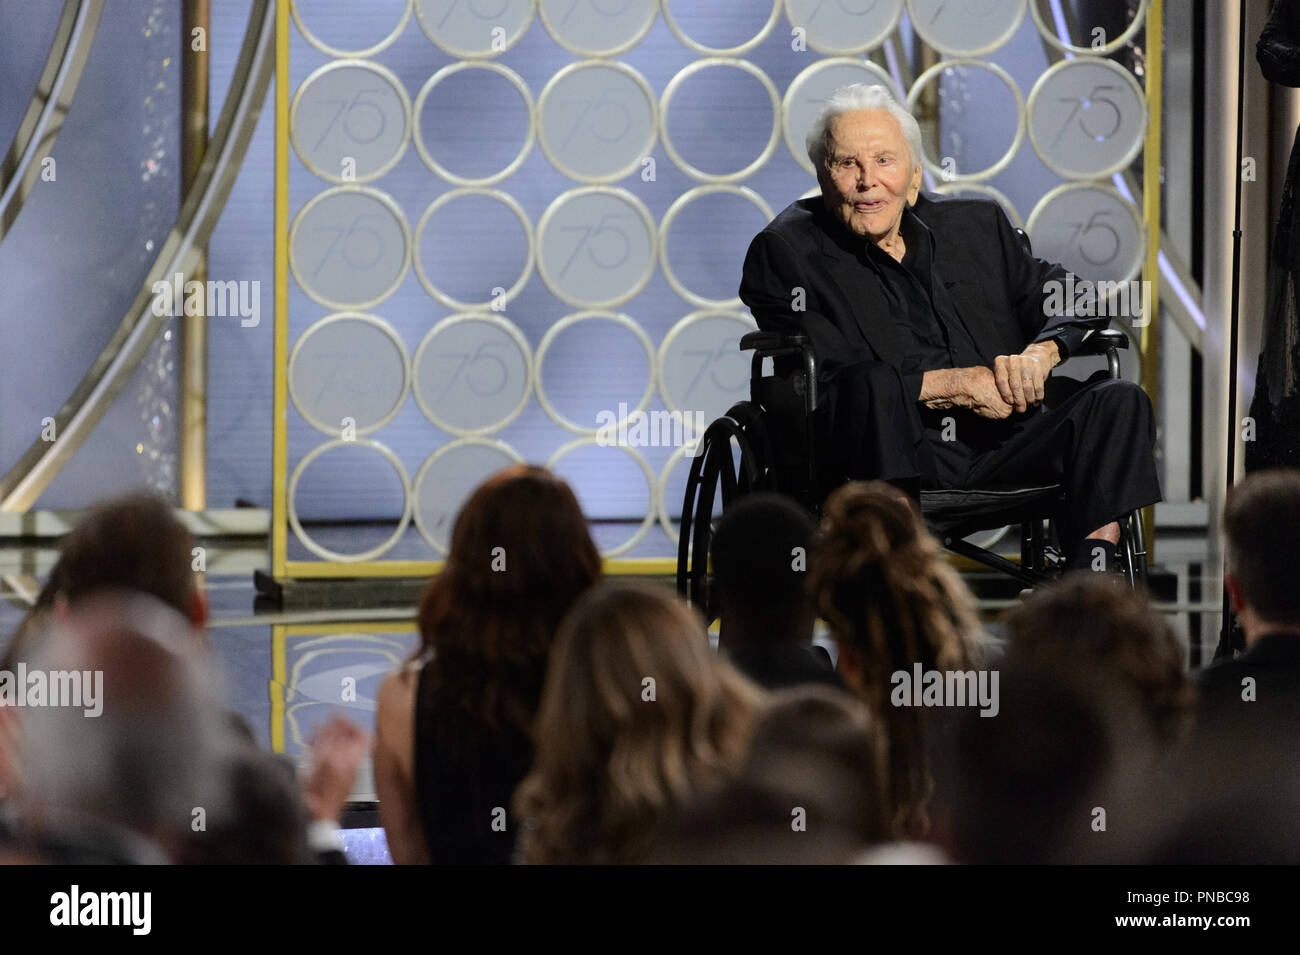 Kirk Douglas on stage at the 75th Annual Golden Globe Awards at the Beverly Hilton in Beverly Hills, CA on Sunday, January 7, 2018.  File Reference # 33508 555JRC  For Editorial Use Only -  All Rights Reserved Stock Photo